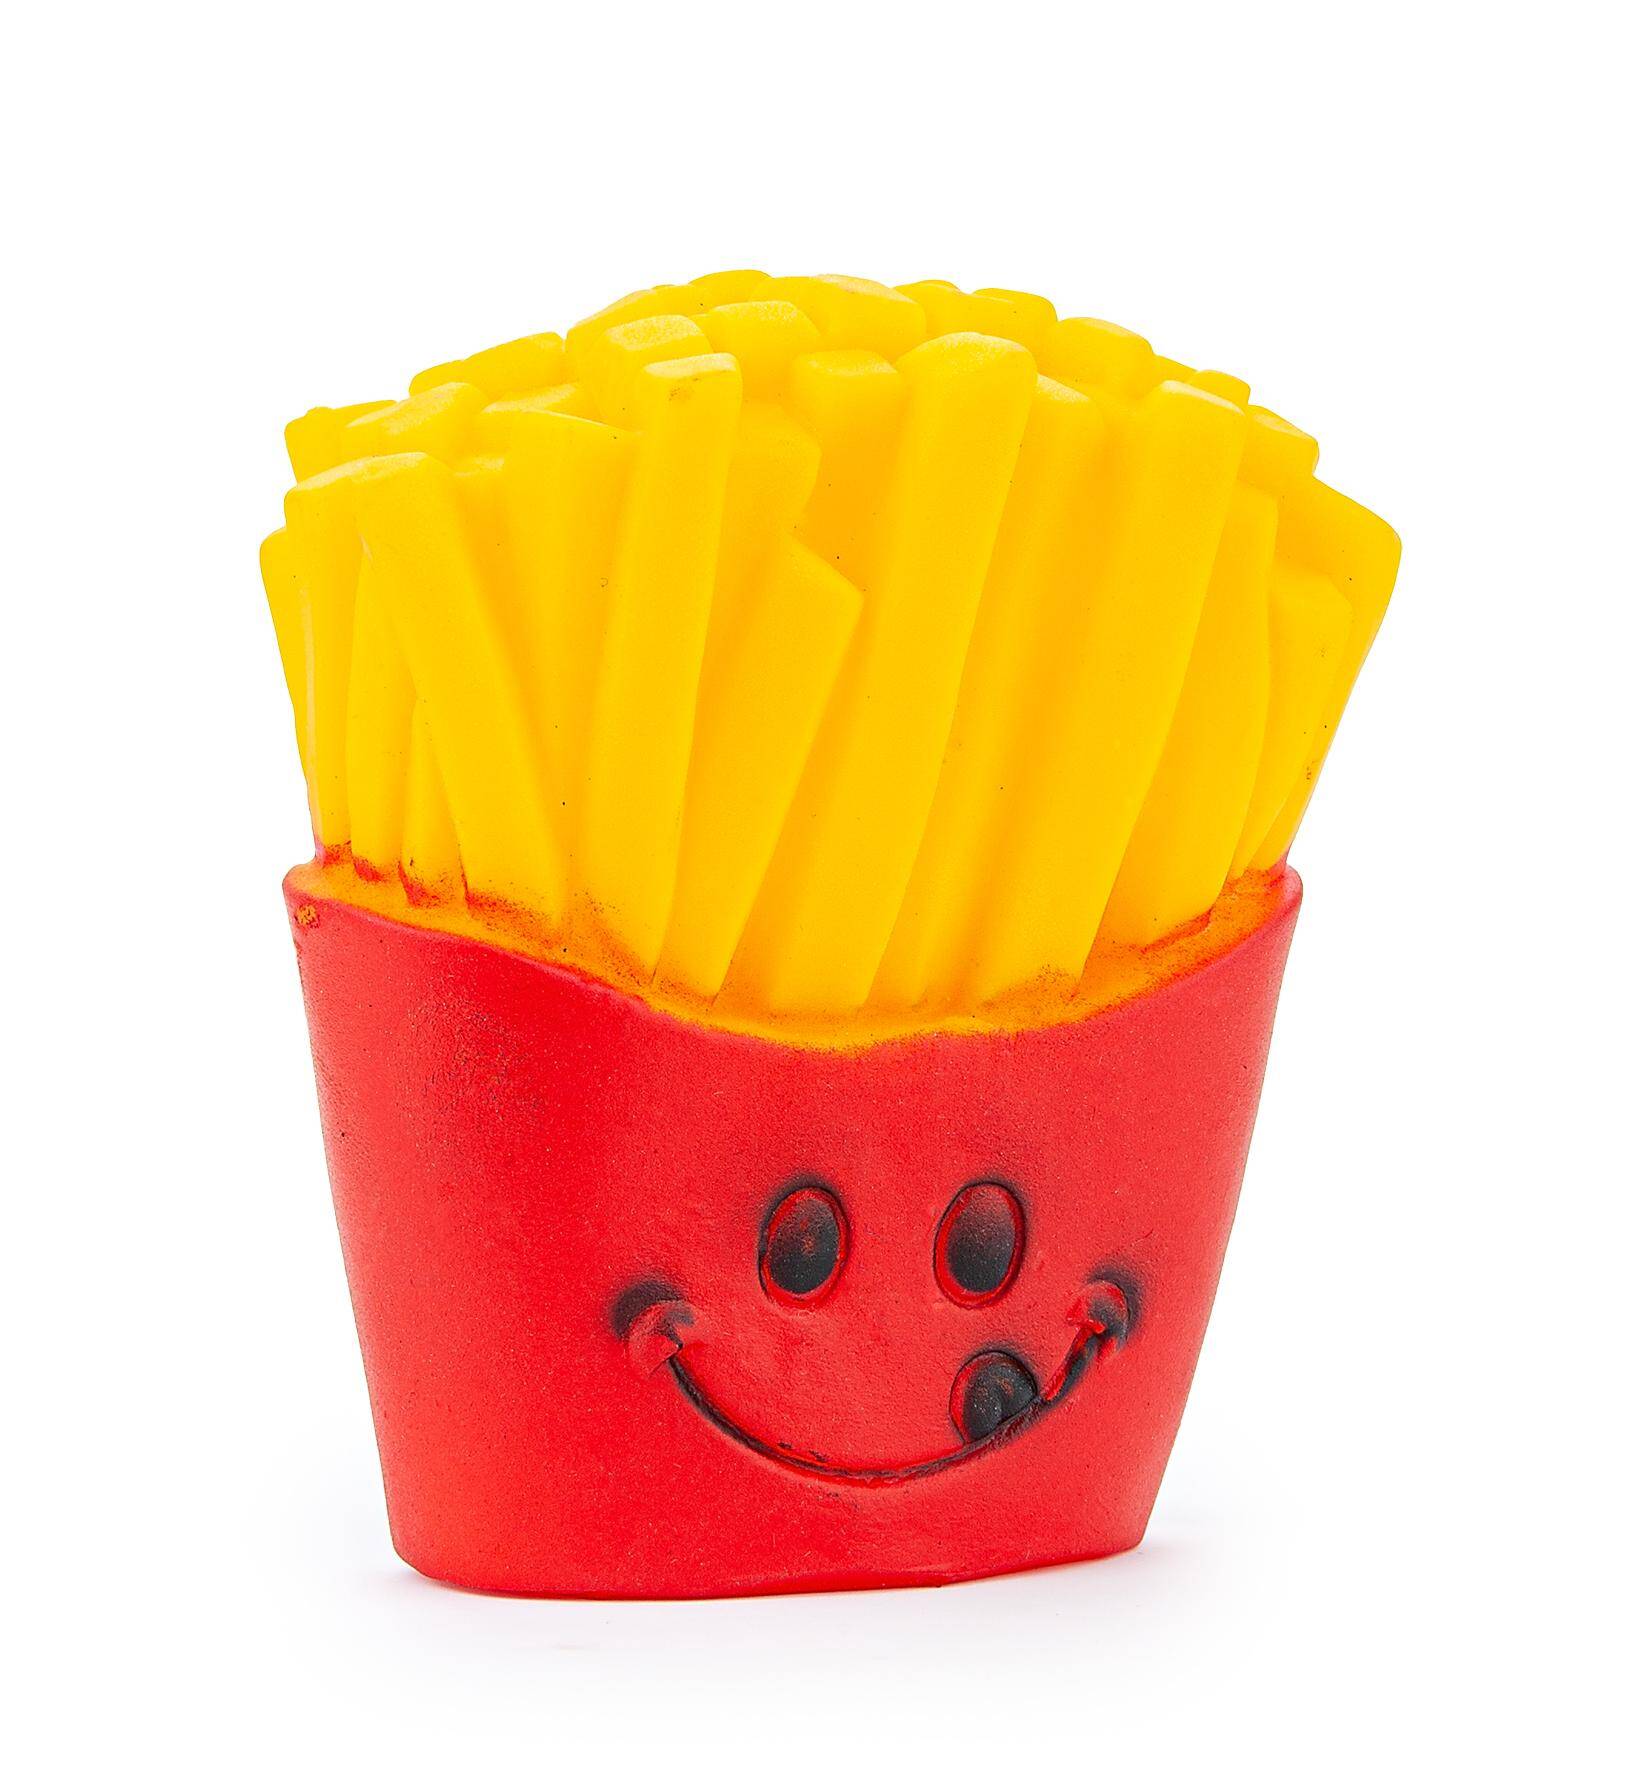 French Fries Toy - Happet Z065